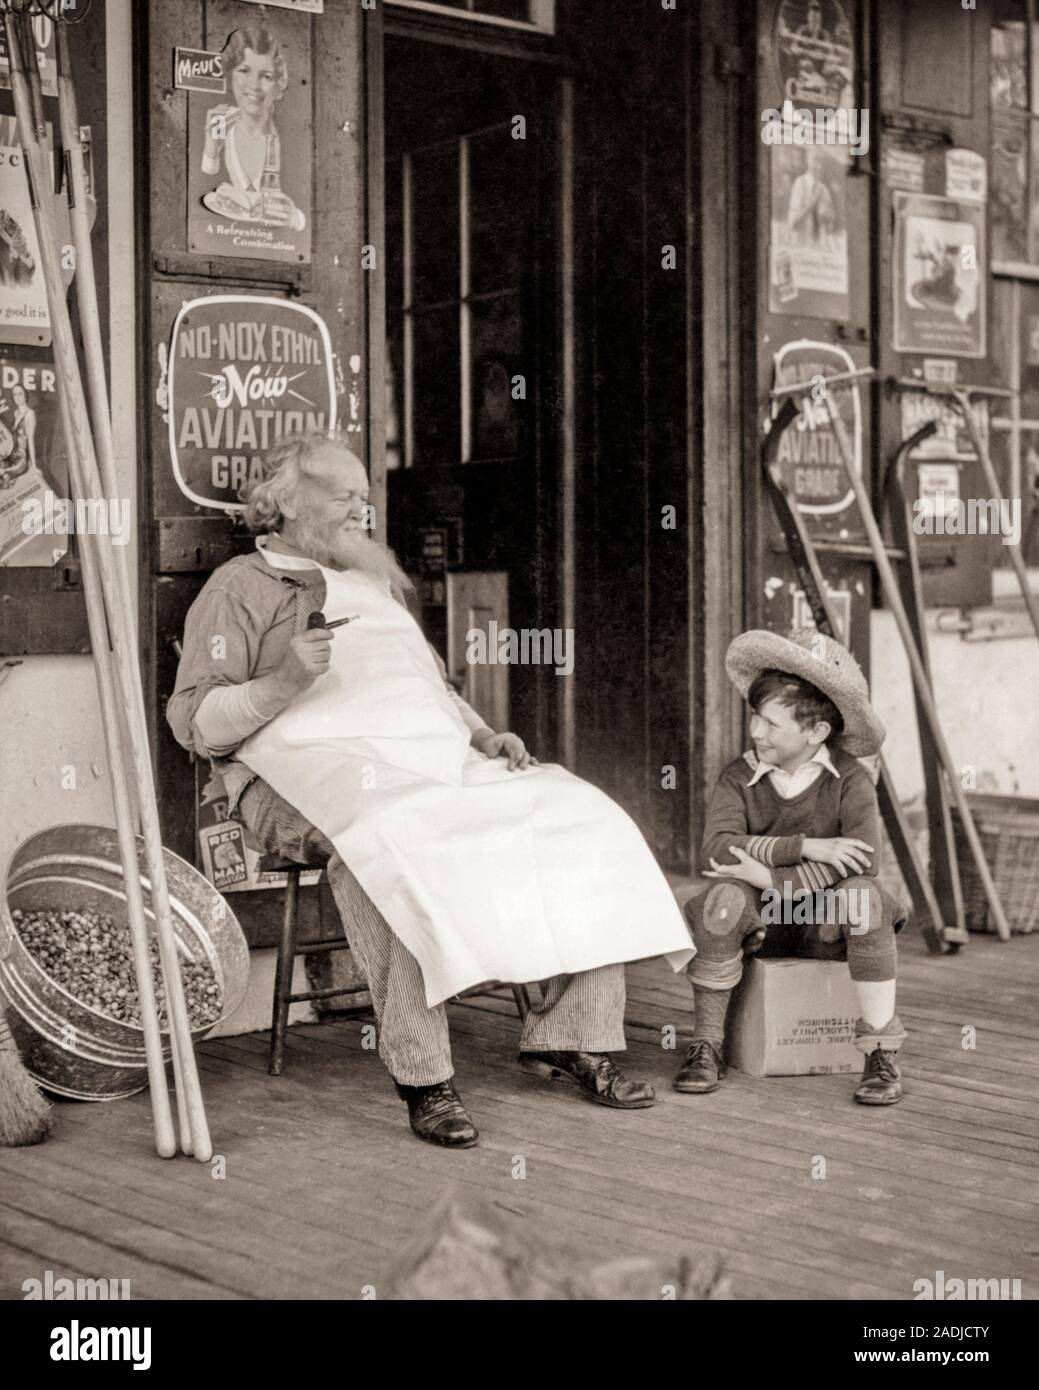 1930s ELDERLY SHOPKEEPER WEARING APRON SMOKING PIPE SITTING WITH YOUNG BOY WEARING STRAW HAT RAGGEDY CLOTHES GENERAL STORE PORCH - s5449 HAR001 HARS STRAW PORCH SENIORS OLD TIME NOSTALGIA OLD FASHION 1 JUVENILE COMMUNICATION TEAMWORK GENERATIONS GRANDFATHER GRANDPARENTS PLEASED FAMILIES JOY LIFESTYLE SATISFACTION ELDER GRANDPARENT PIPE GENERAL RURAL UNITED STATES COPY SPACE FRIENDSHIP FULL-LENGTH HALF-LENGTH PERSONS SHOPS INSPIRATION UNITED STATES OF AMERICA CARING MALES B&W NORTH AMERICA NORTH AMERICAN HAPPINESS OLD AGE OLDSTERS CHEERFUL HIGH ANGLE OLDSTER OWNER TOBACCO GENERAL STORE EXTERIOR Stock Photo